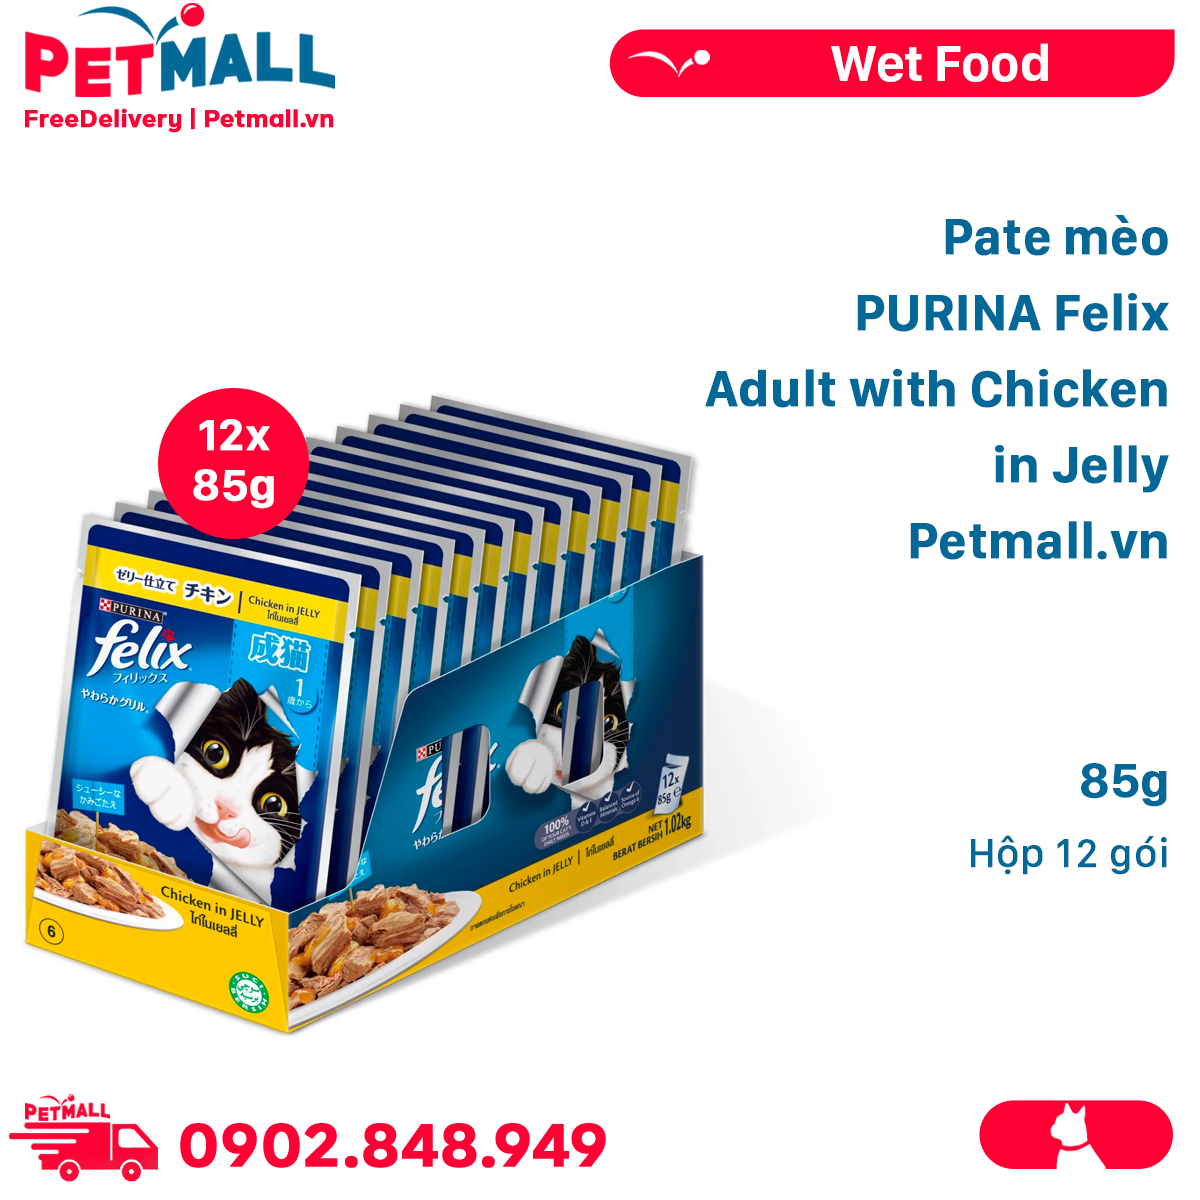 Pate mèo PURINA Felix Adult with Chicken in Jelly 85g - Hộp 12 gói Petmall